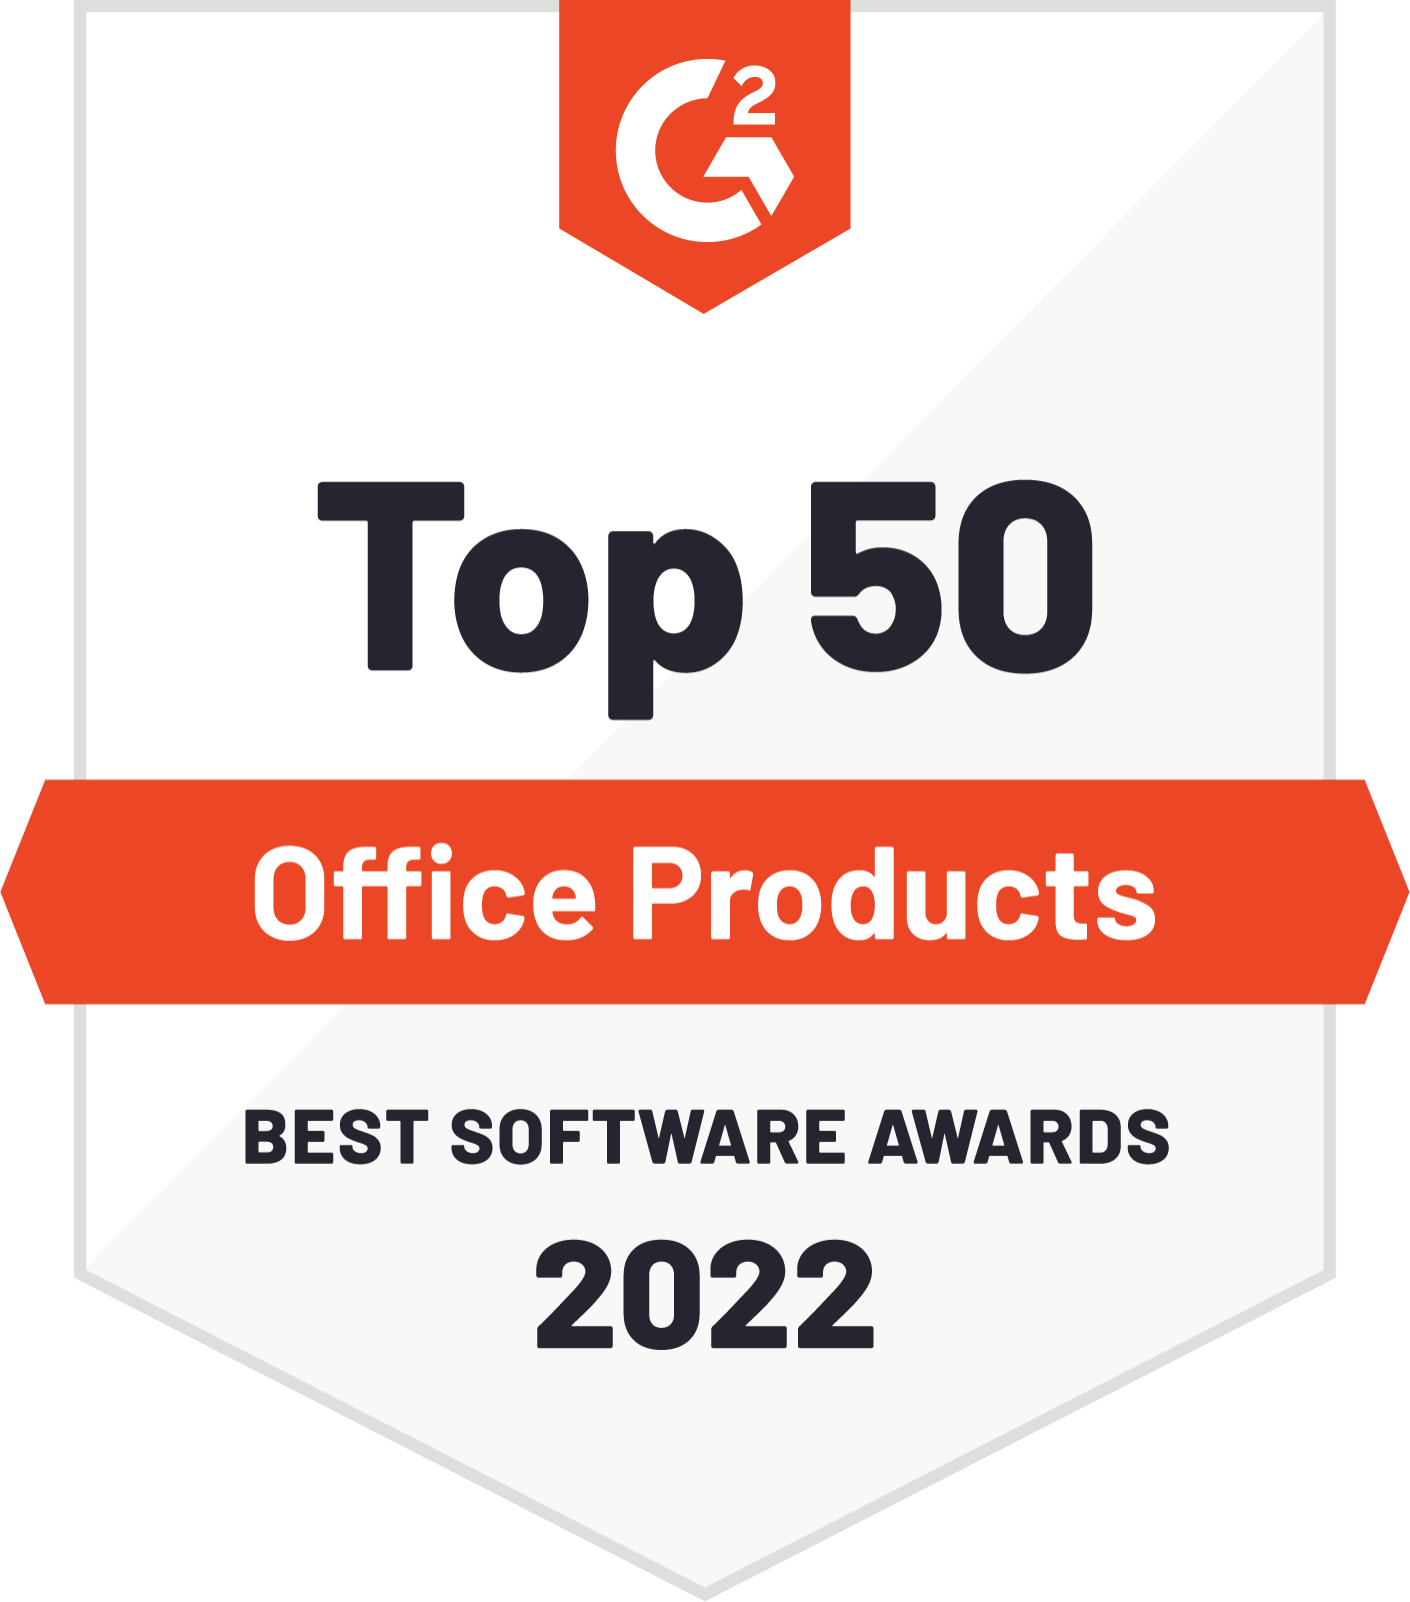 G2 Top 50 Office Products - Best Software Awards 2022